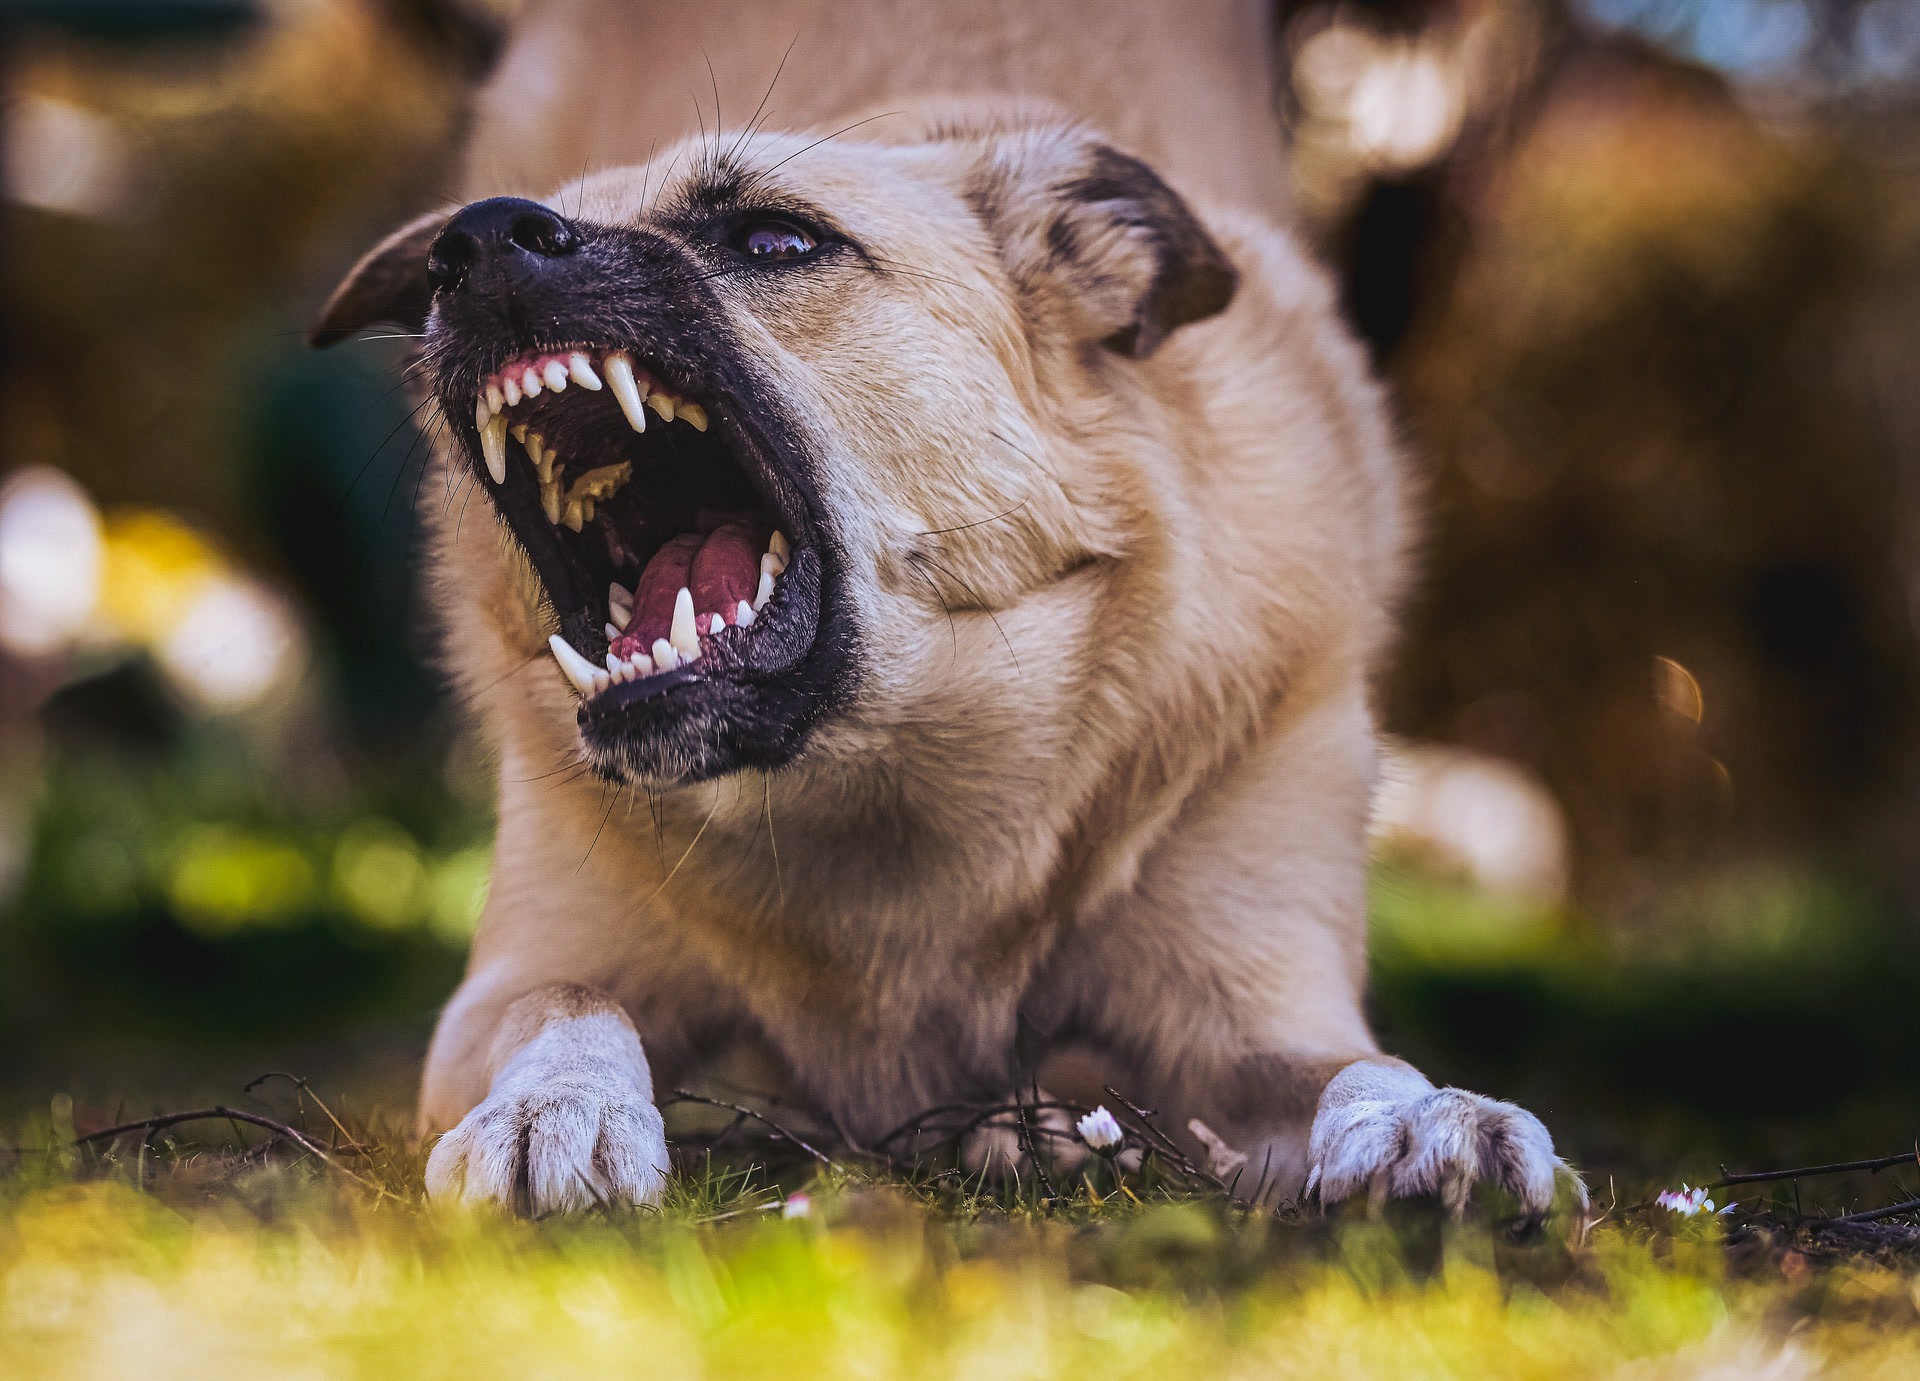 An aggressive dog snarls and bares teeth in a threatening manor.